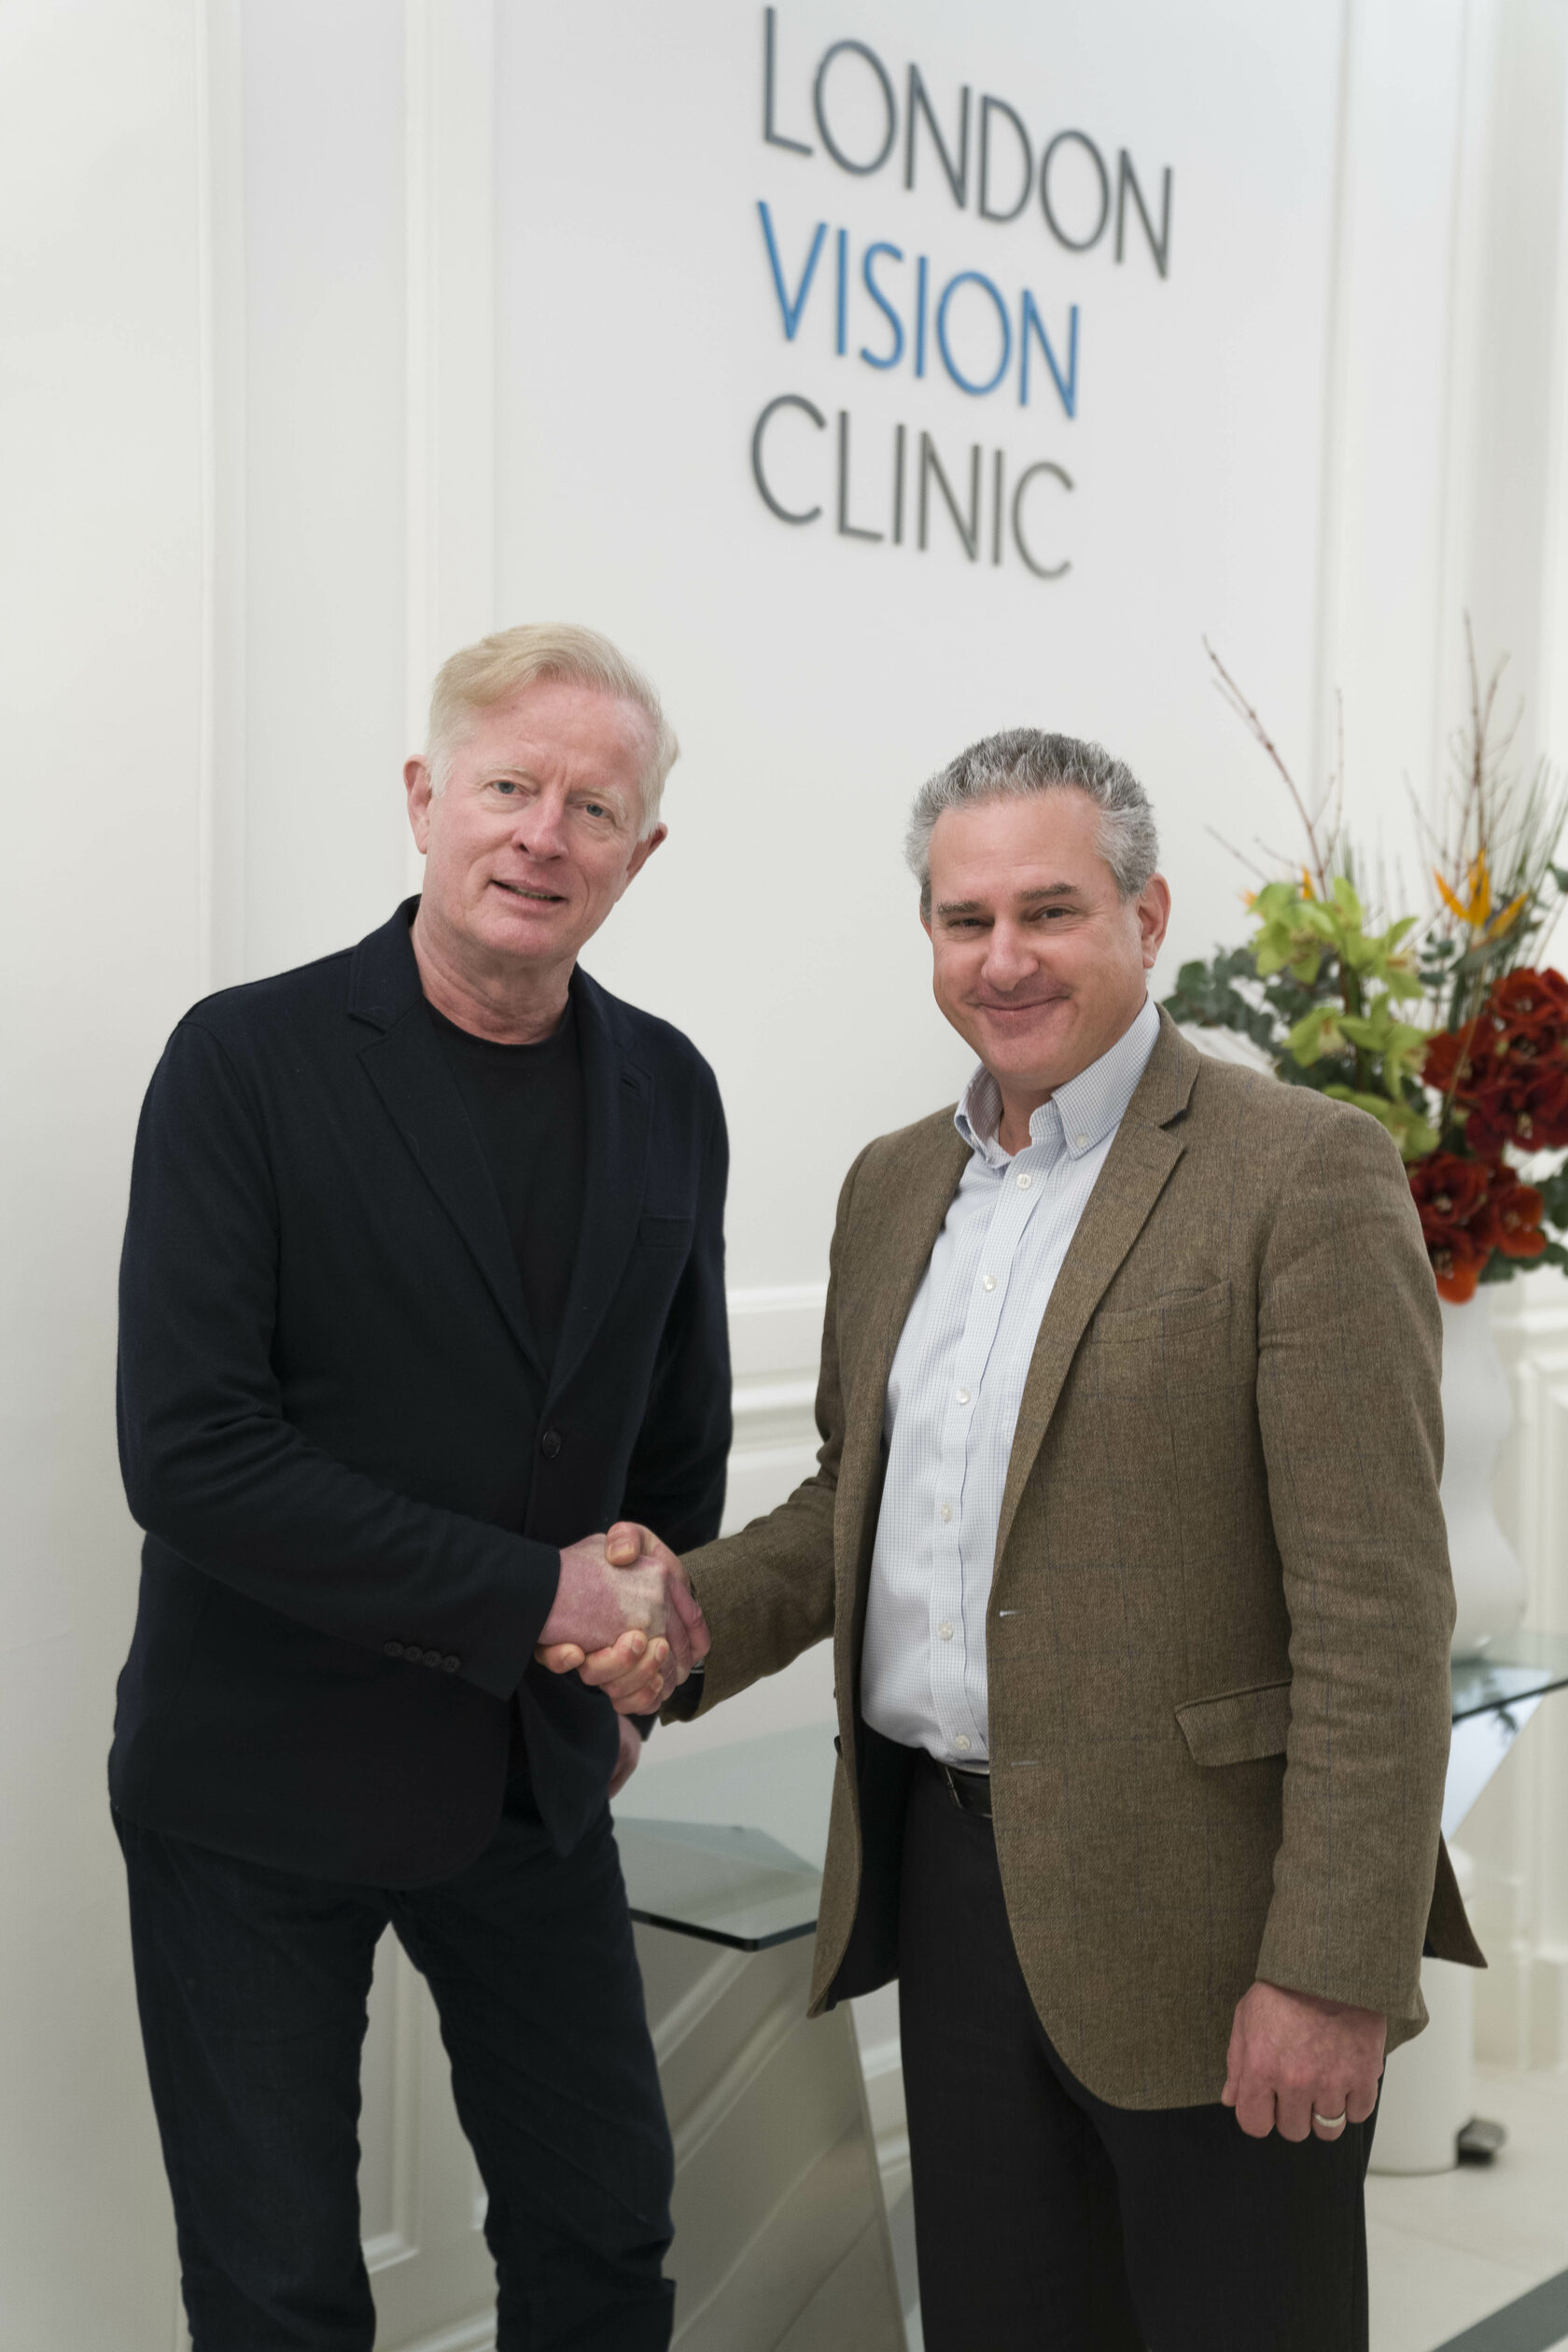 London Vision Clinic and EuroEyes Merge